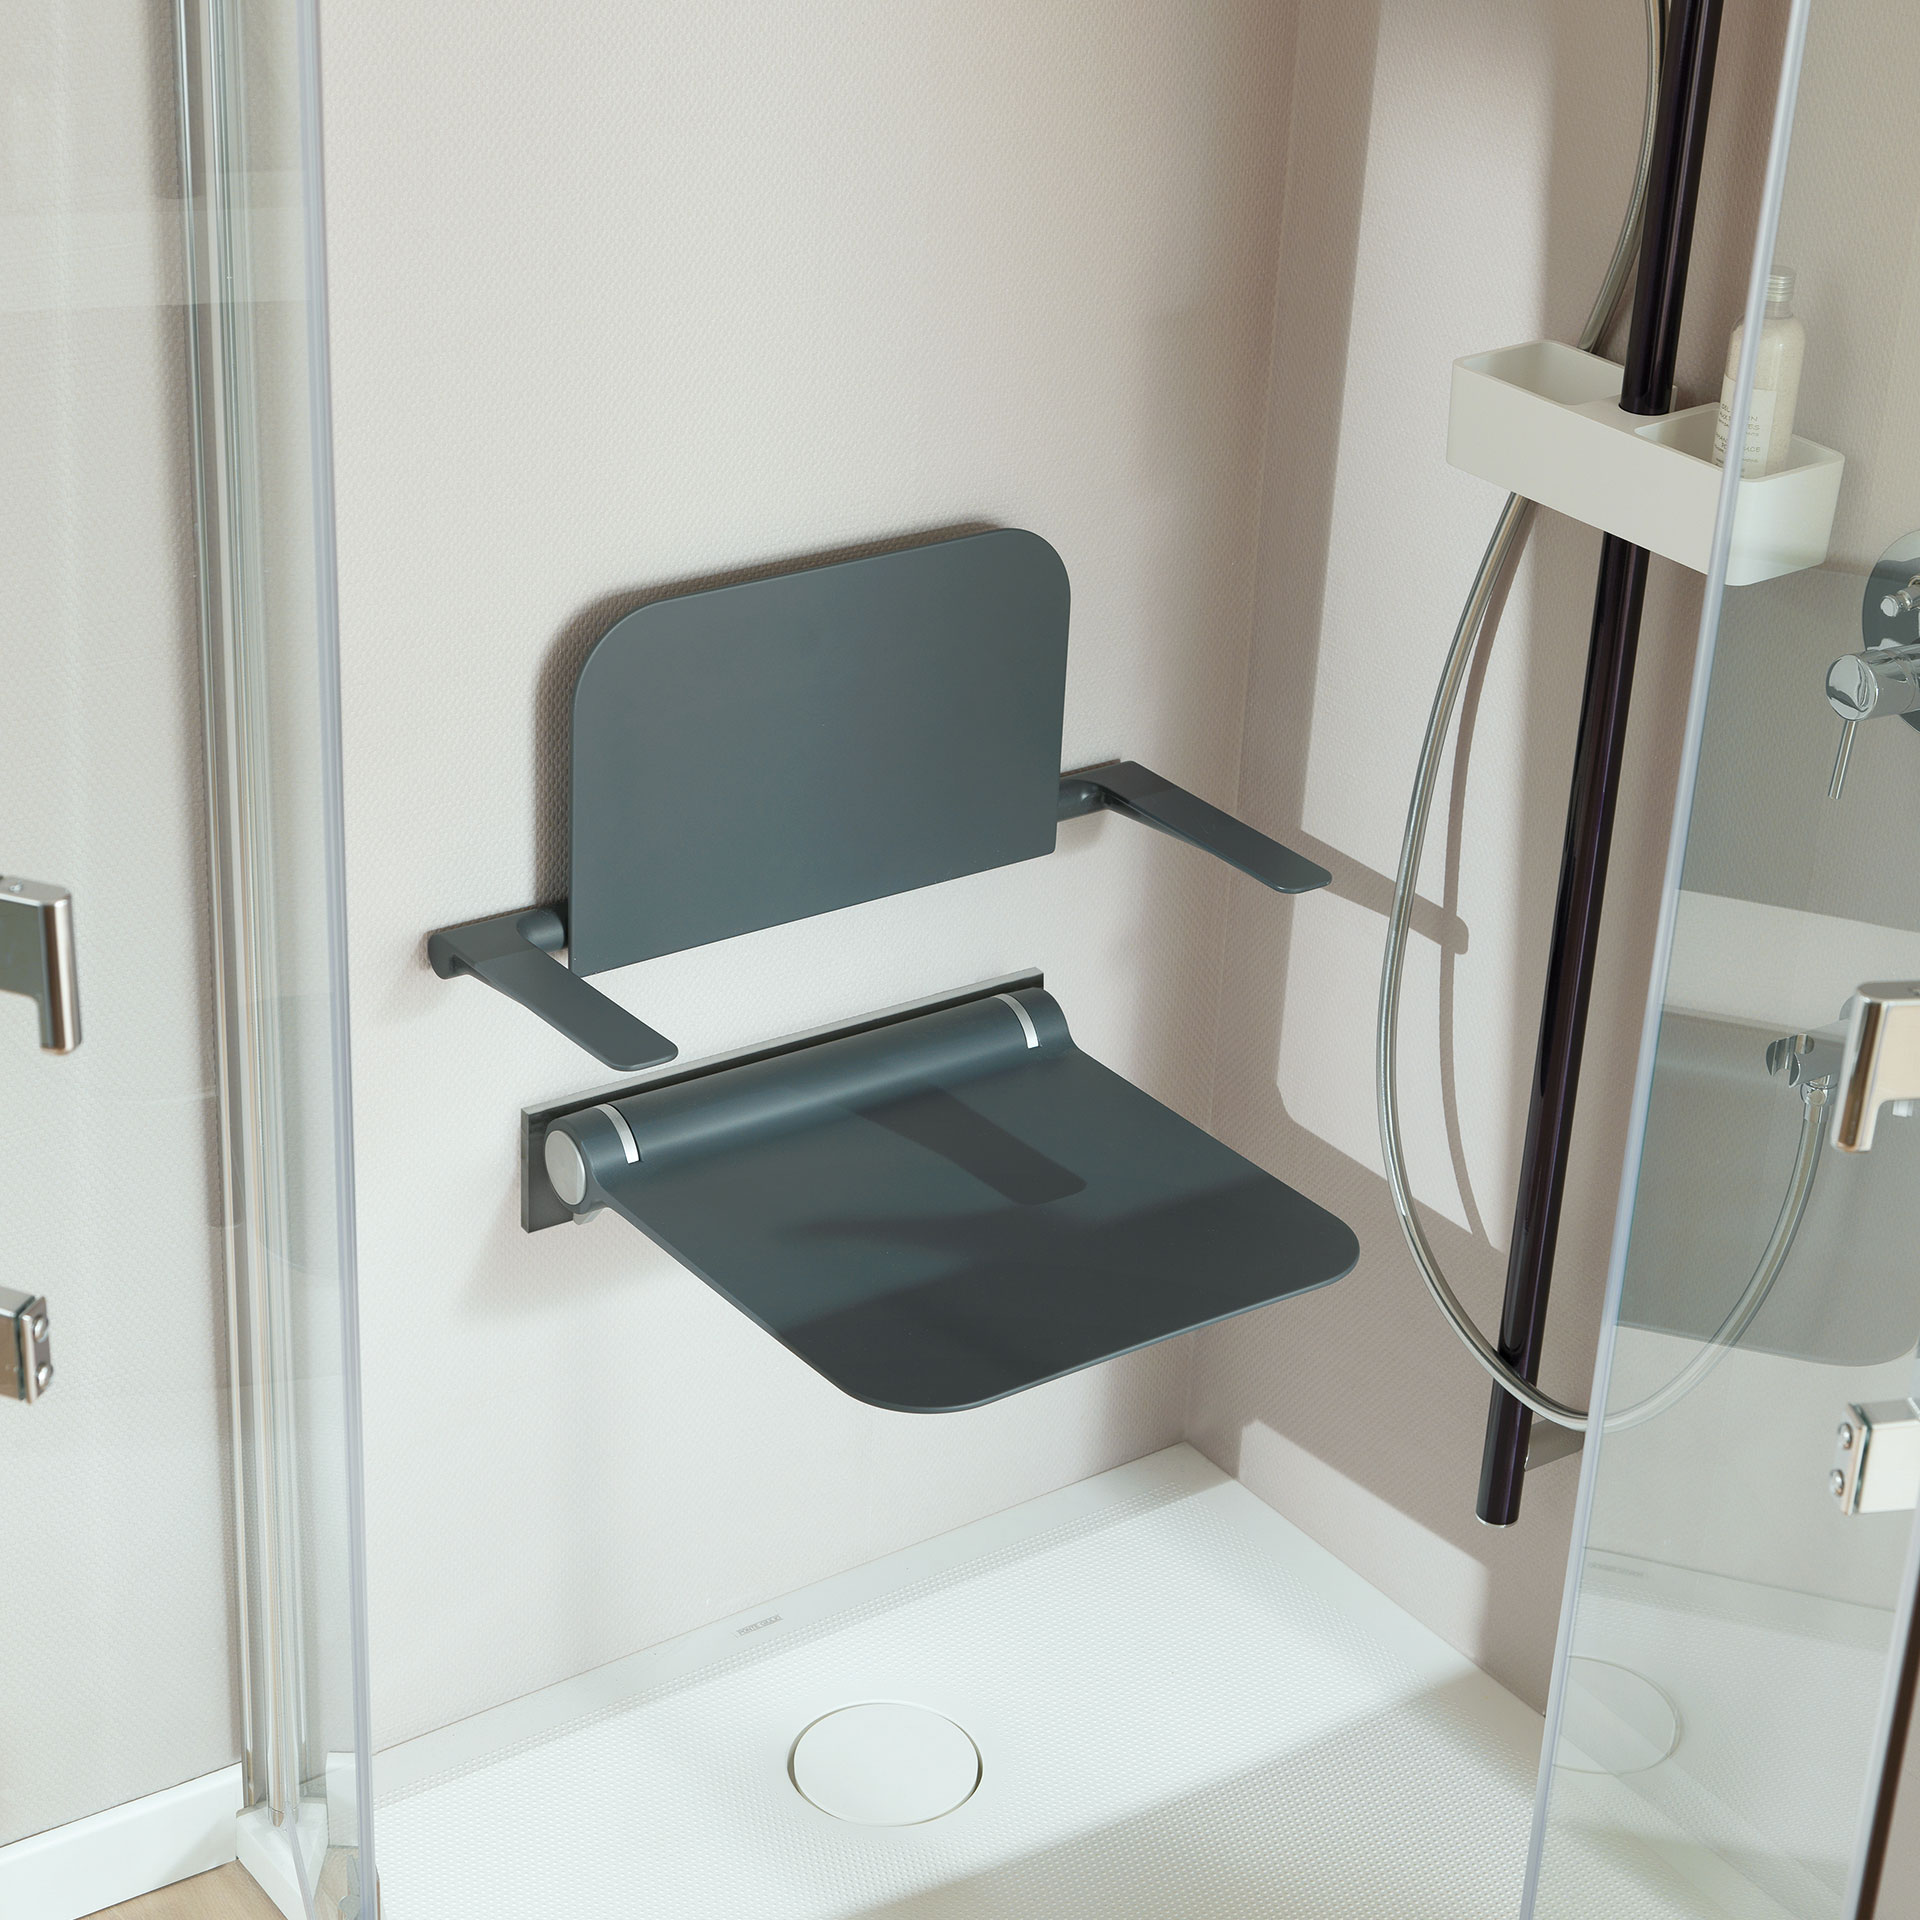 Removable seat for a safe and functional shower